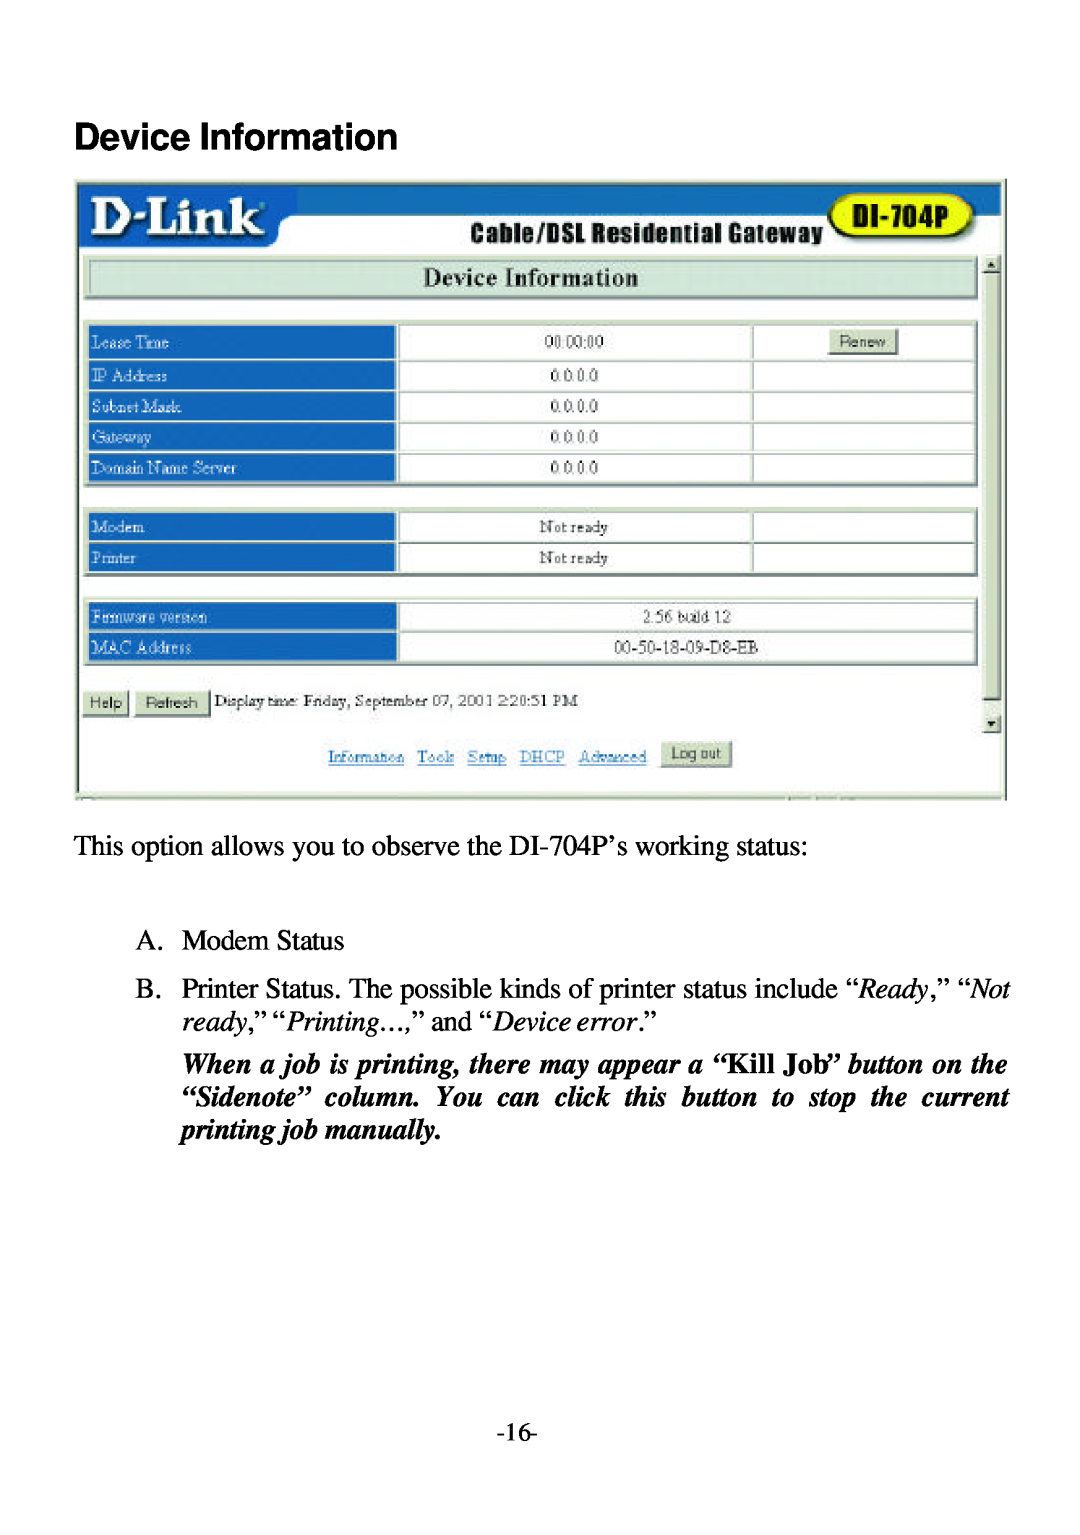 D-Link user manual Device Information, This option allows you to observe the DI-704P’s working status, A. Modem Status 